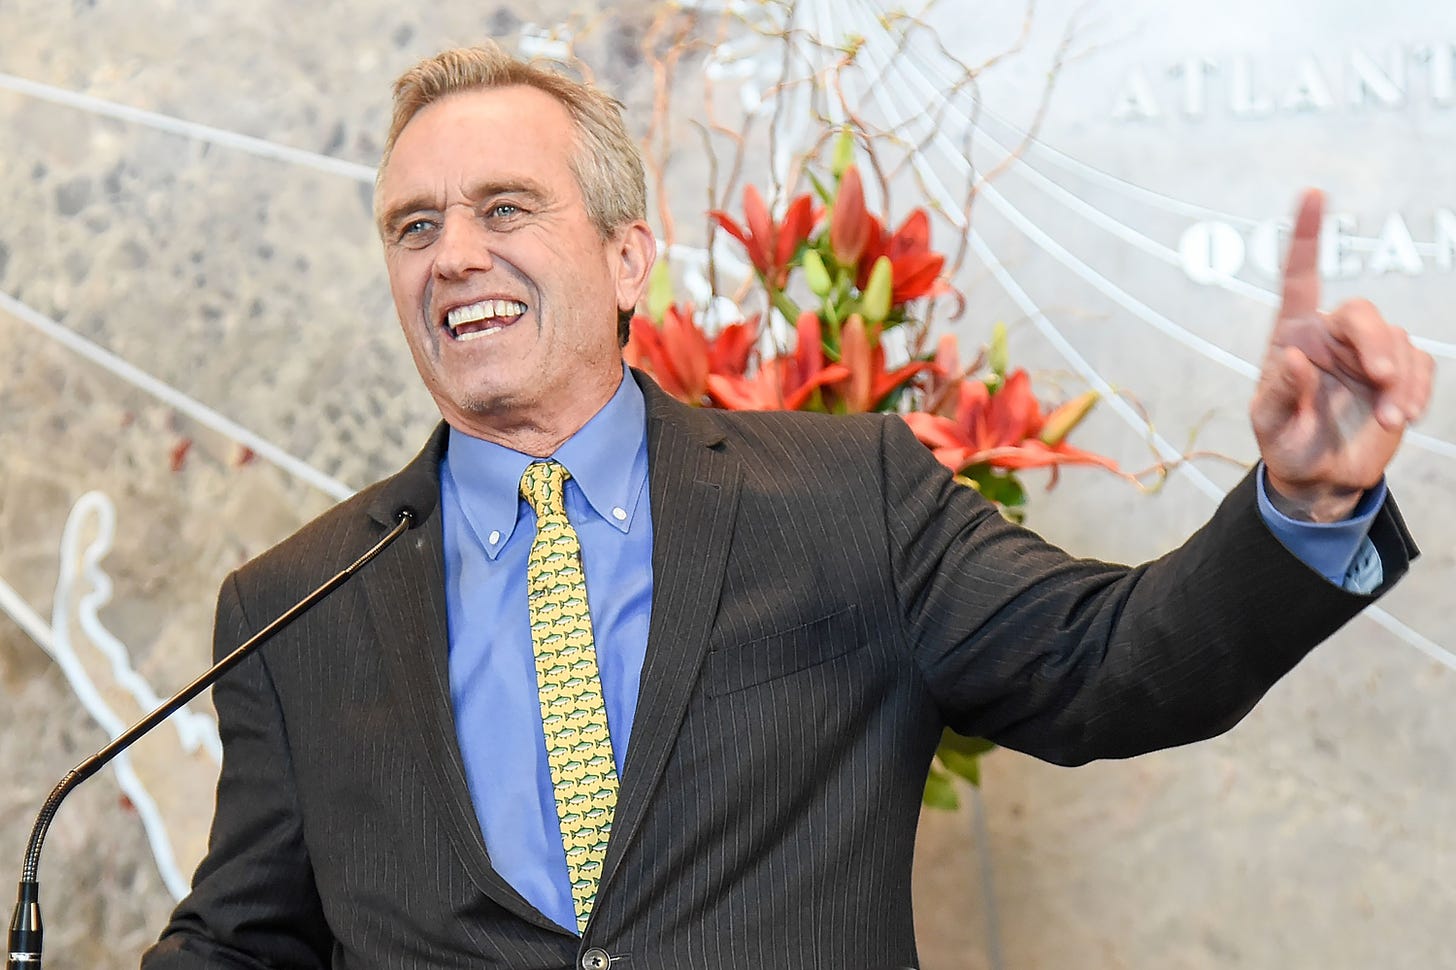 Robert F. Kennedy Jr. lands new job at law firm | Page Six